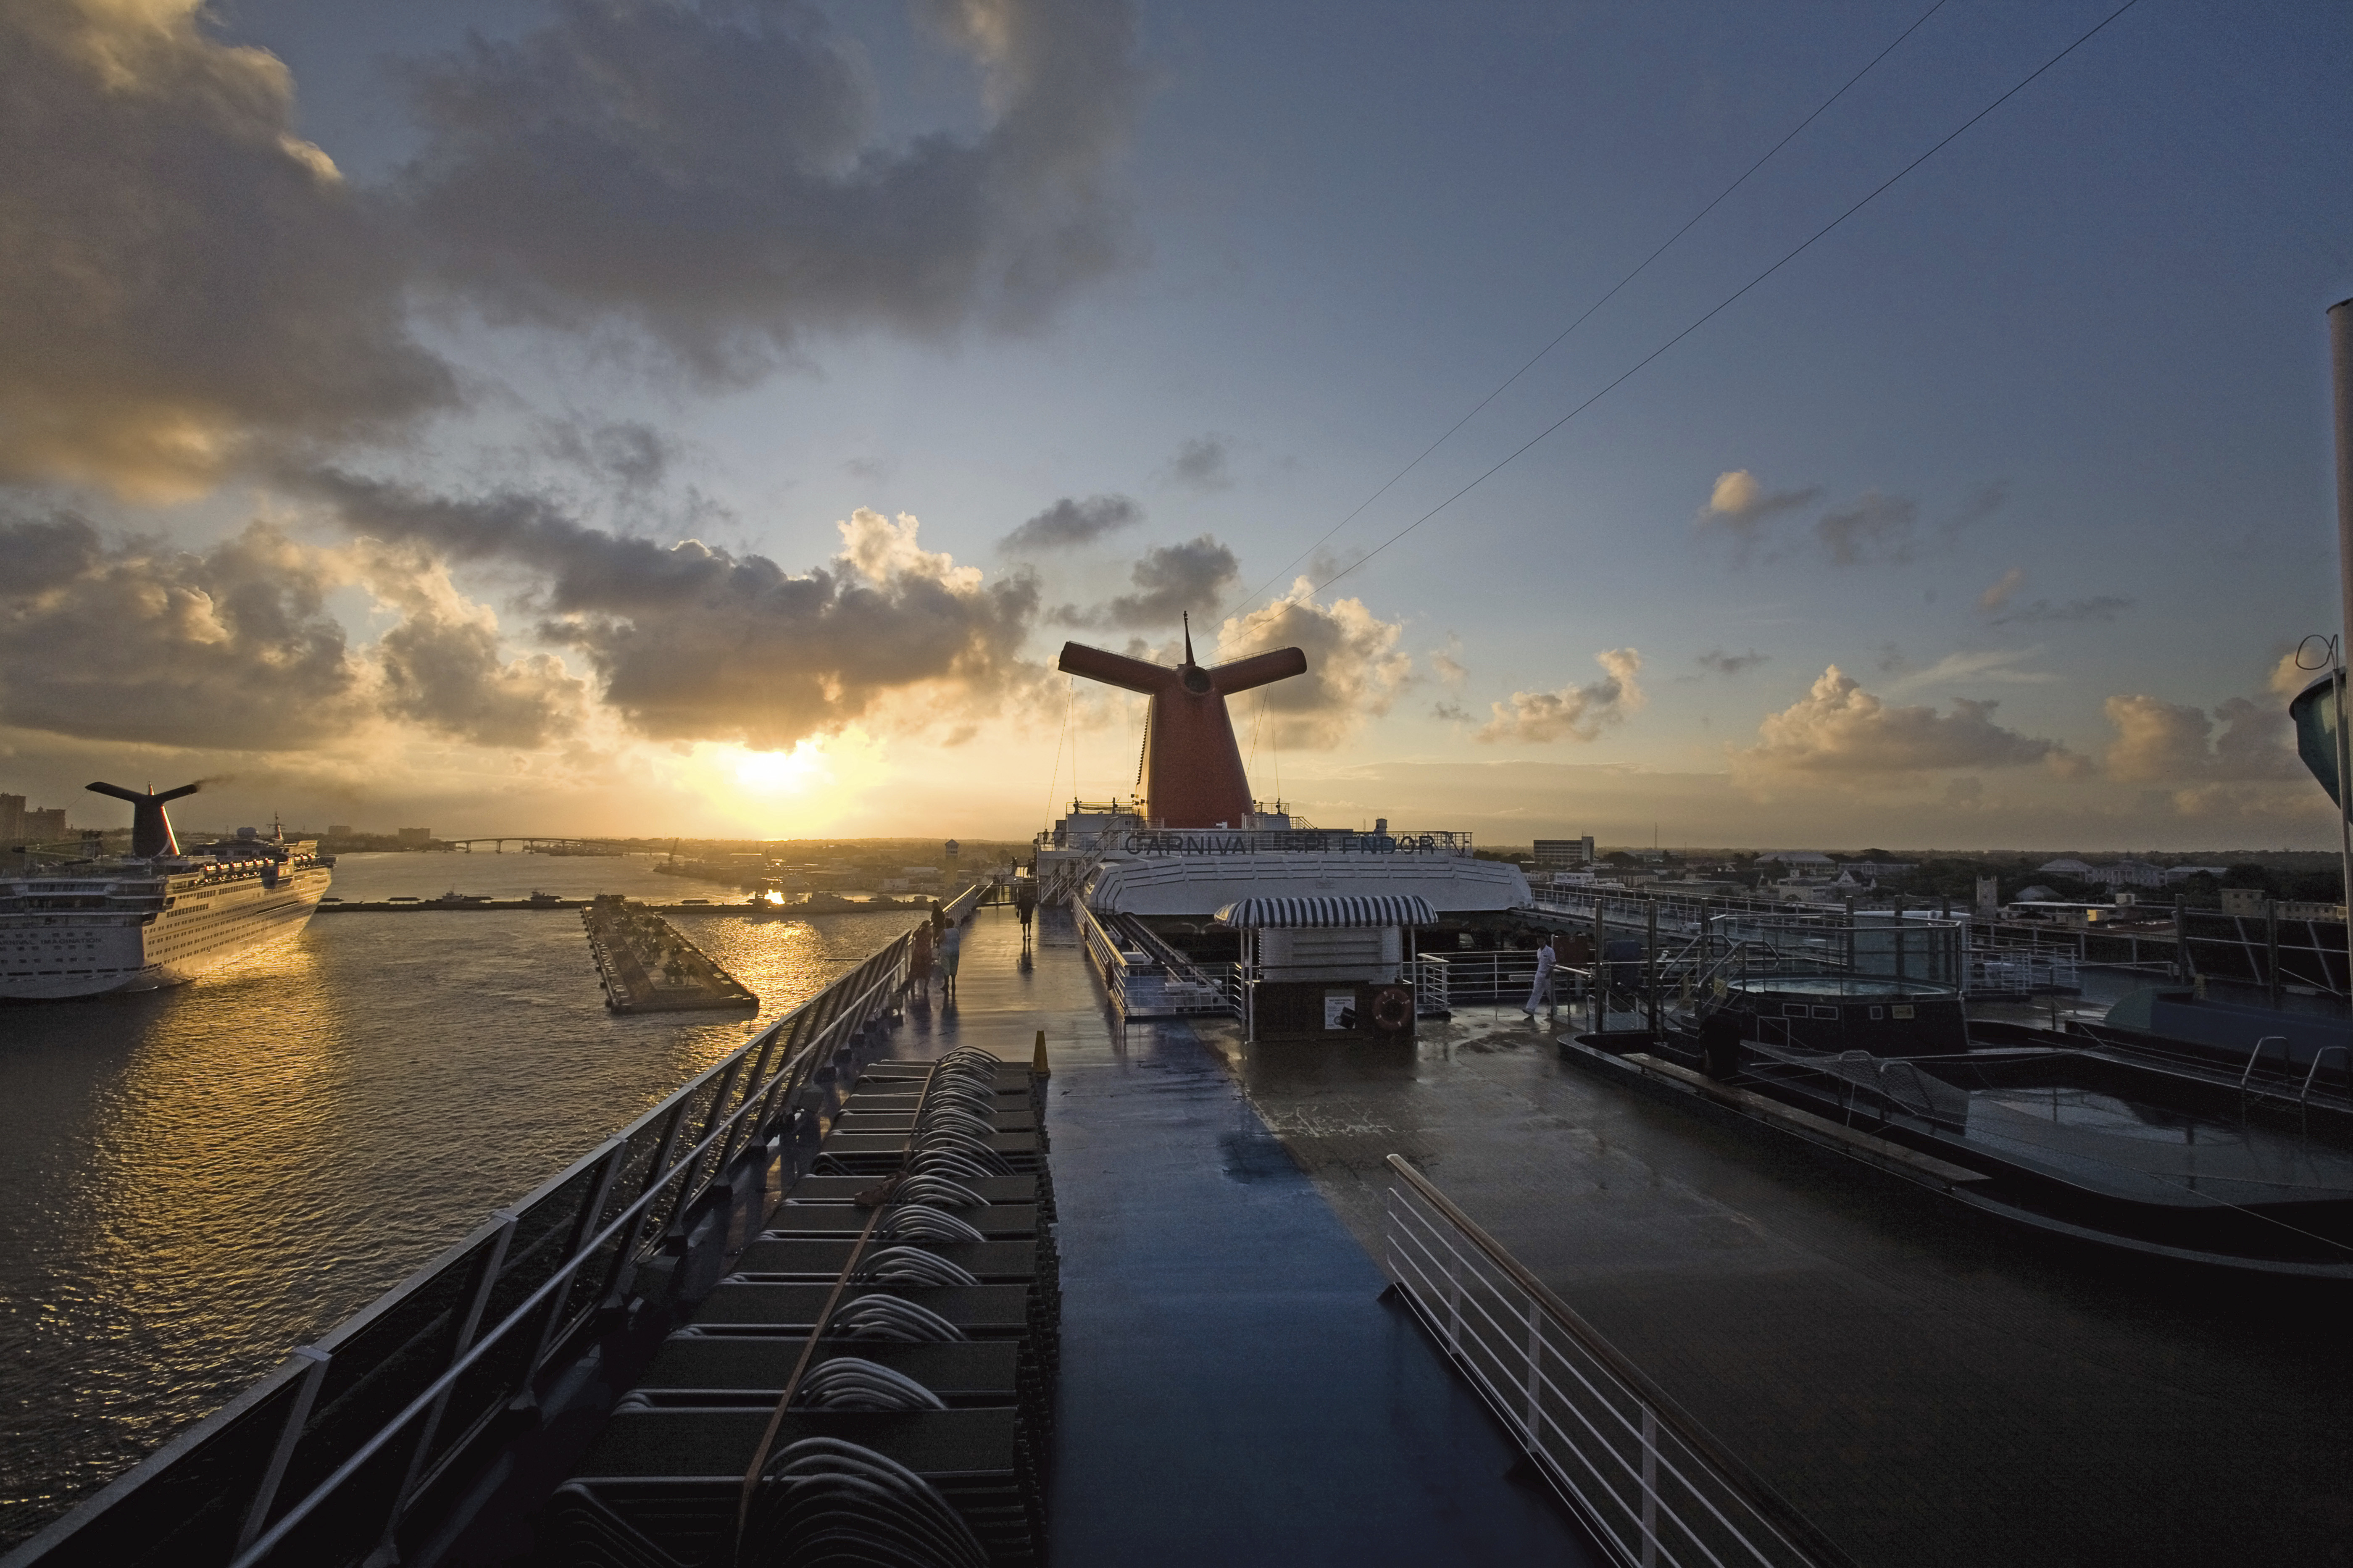 Carnival ship with sunset in background while at port